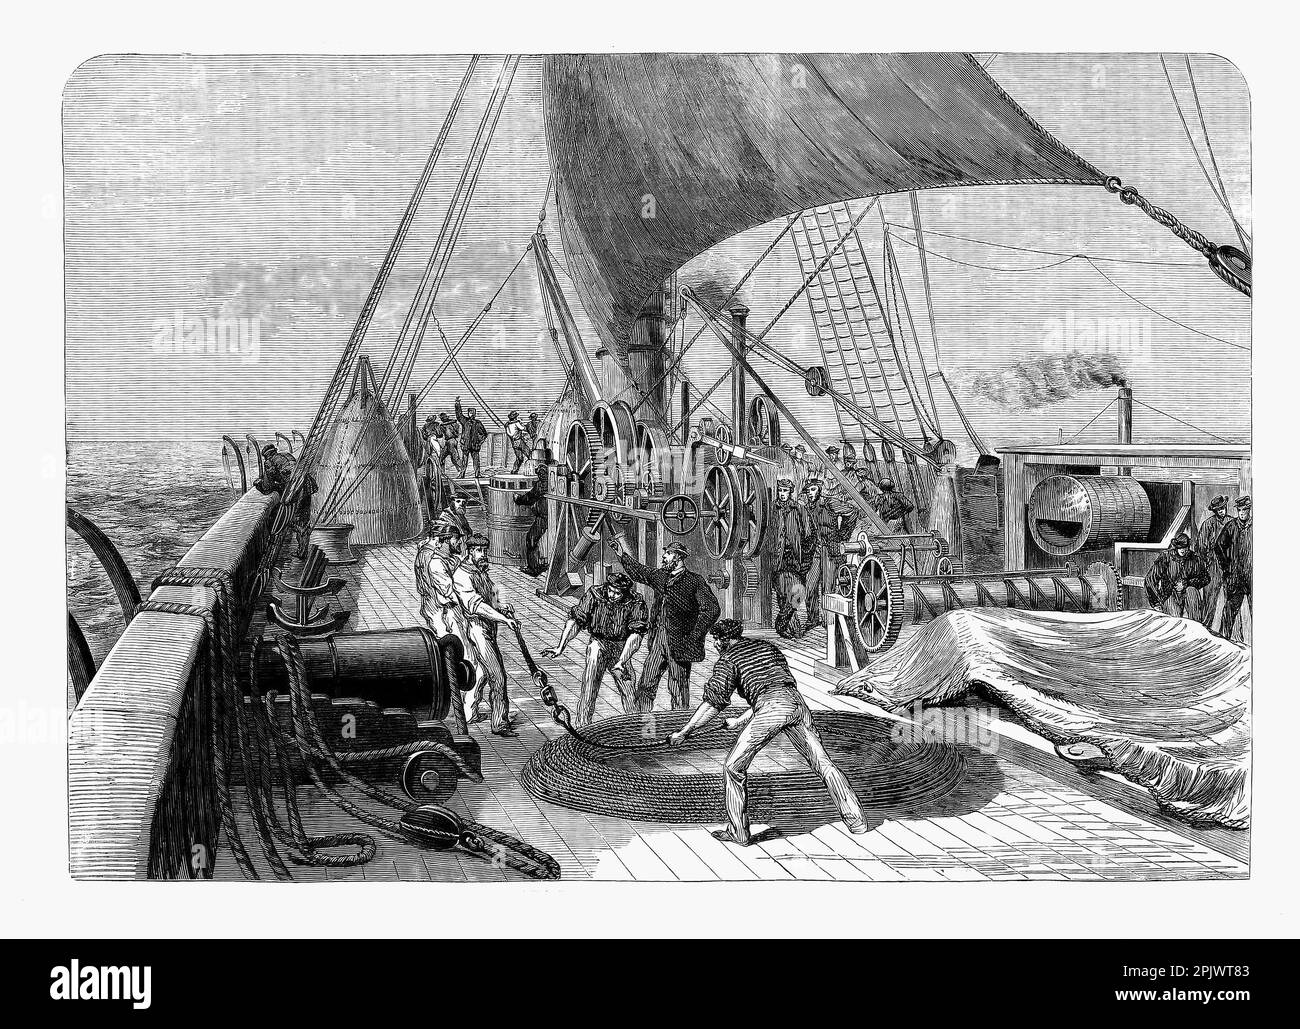 Preparing an attempt to recover a lost cable from the Great Eastern  during the 1865 Atlantic Telegraph Expedition.  The iron sail-powered, paddle wheel and screw-propelled steamship designed by Isambard Kingdom Brunel,  was the largest ship ever built in 1858. Stock Photo